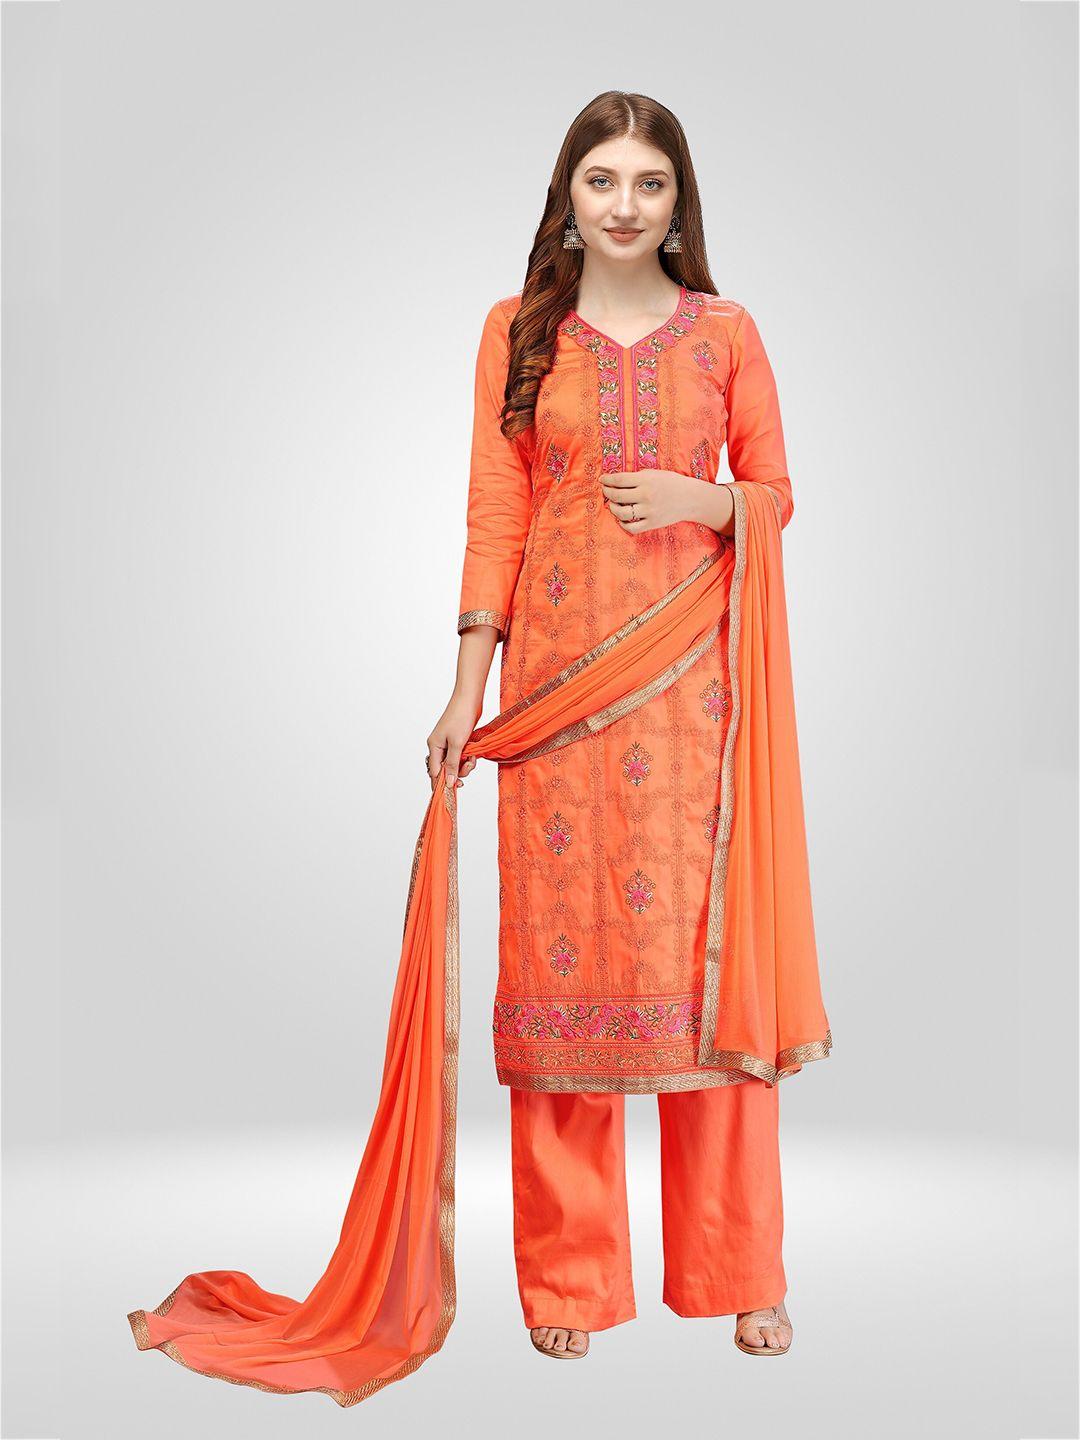 nivah fashion women orange & gold-toned embroidered pure cotton unstitched dress material